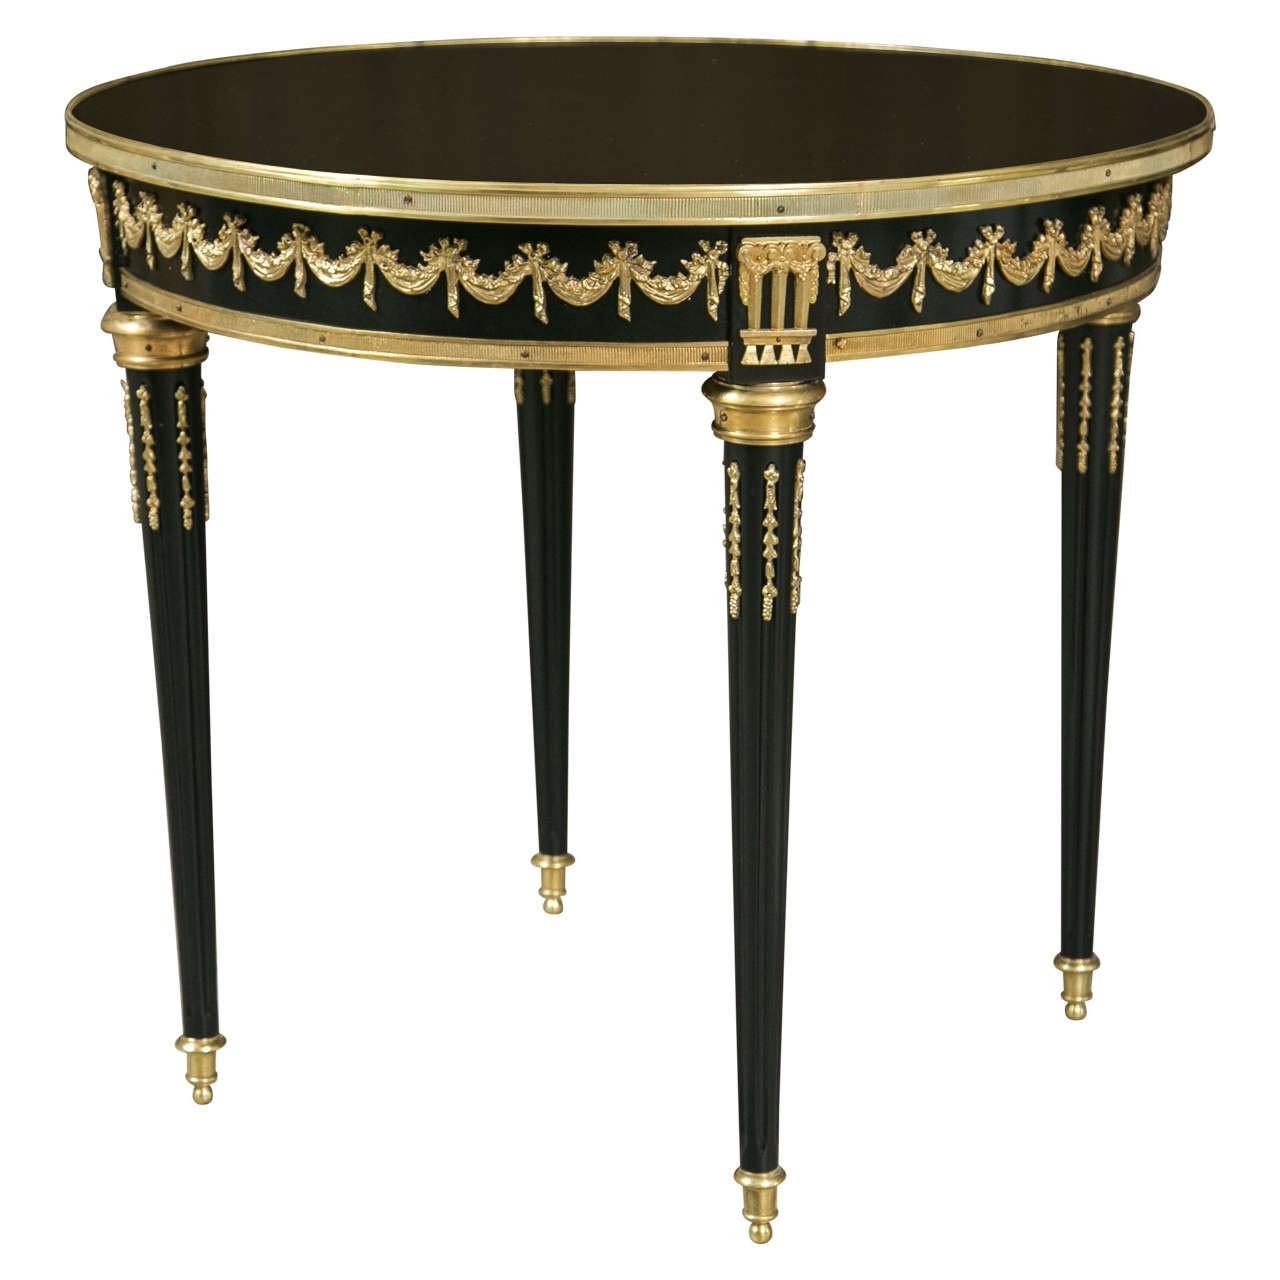 Ebonized and Bronze Mounted Centre Table in Louis XVI Style by Jansen